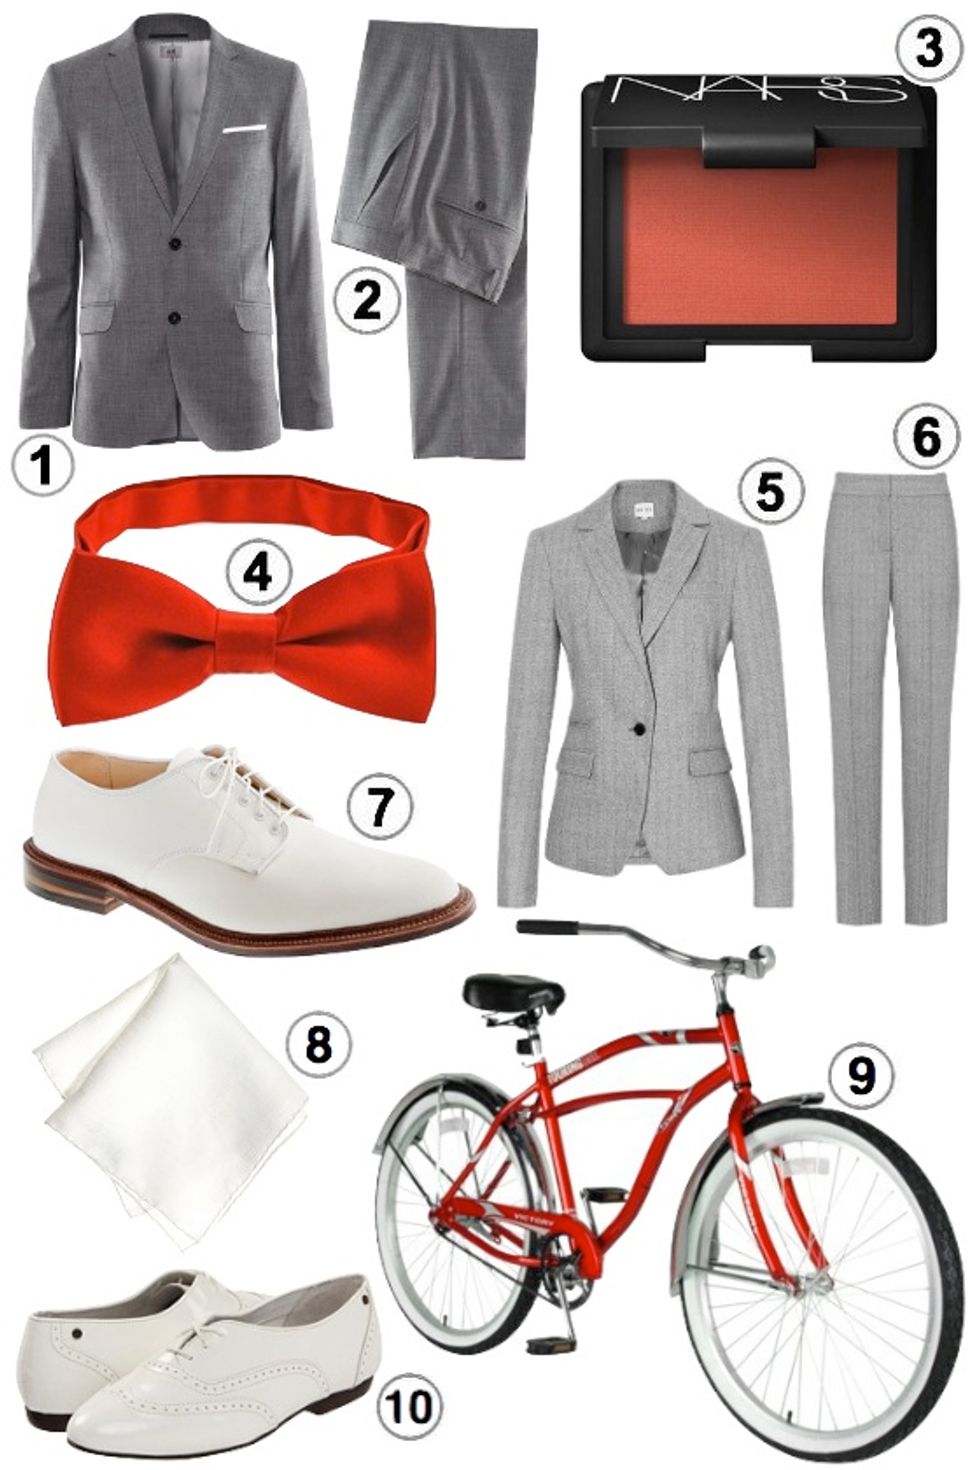 Look of the Week: Pee-wee Herman Halloween Costume for Him and Her